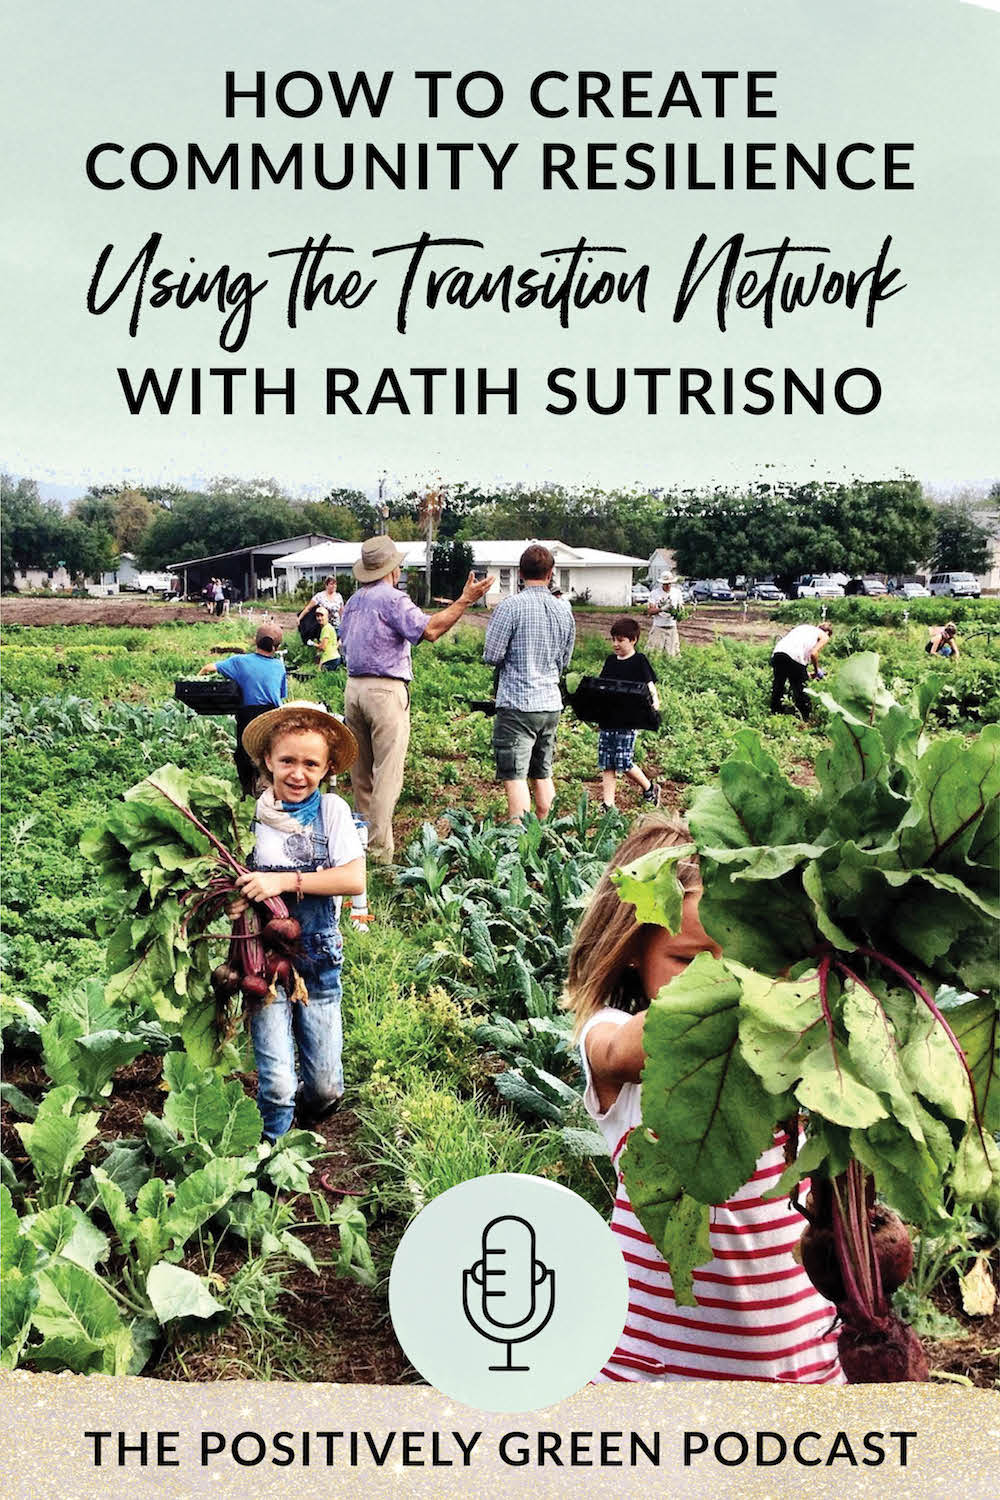 How to create community resilience using the Transition Network with Ratih Sutrisno